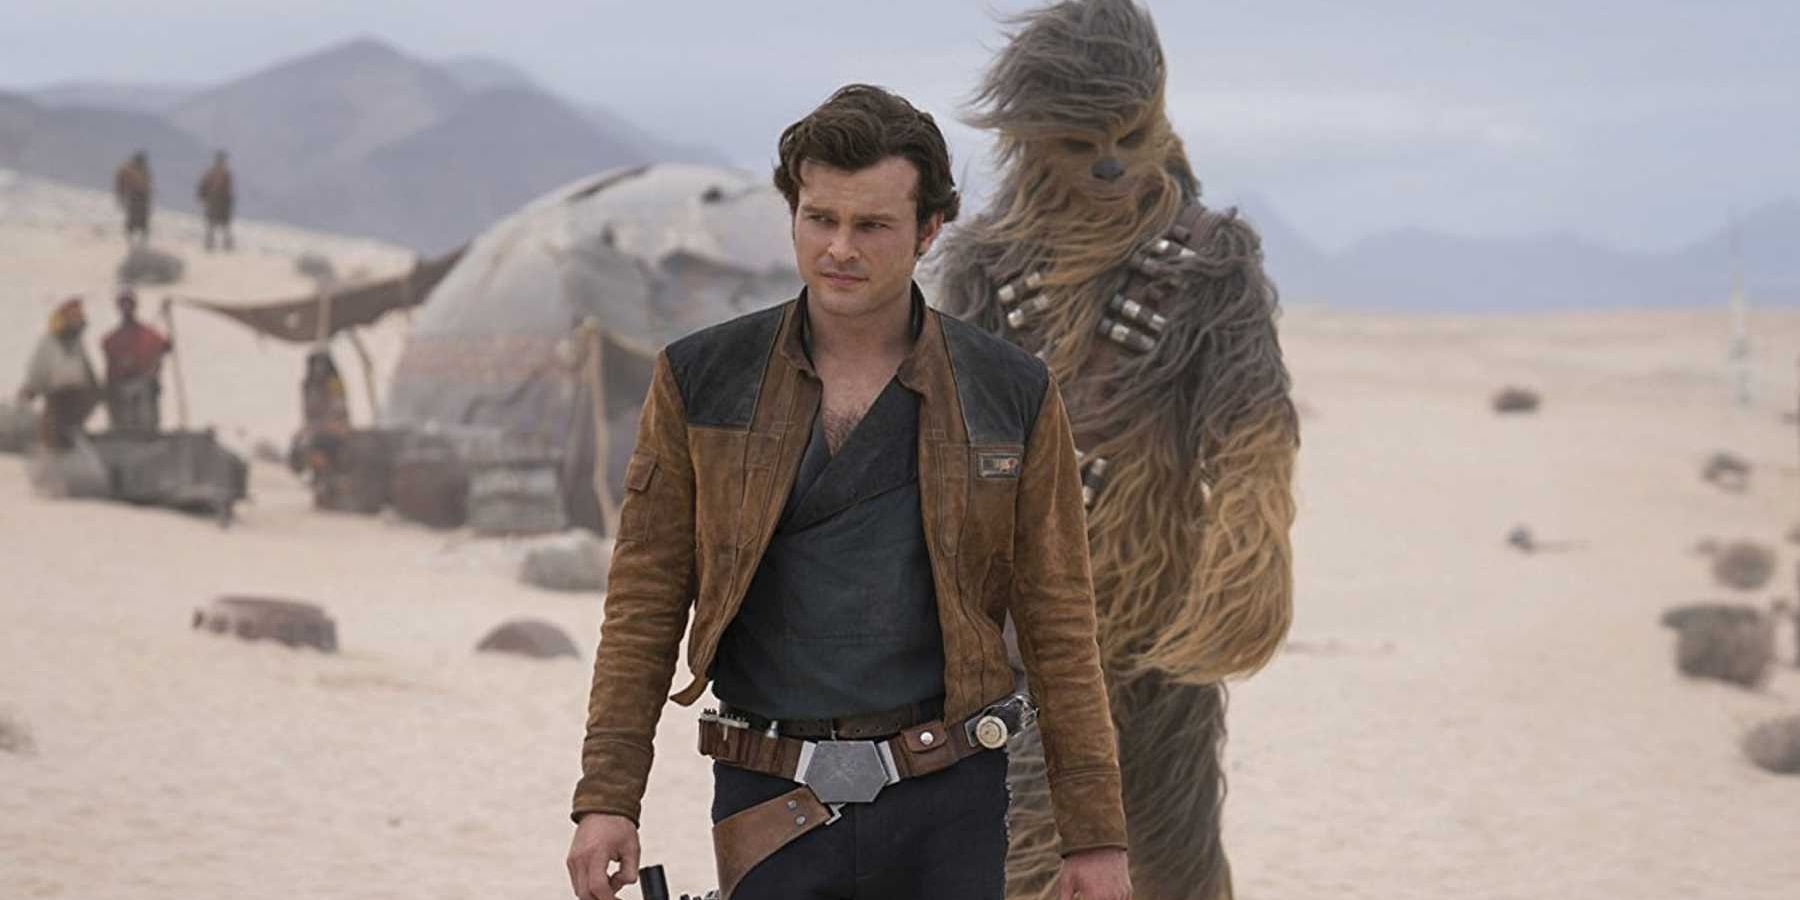 Han and Chewie walk through the desert in Solo A Star Wars Story